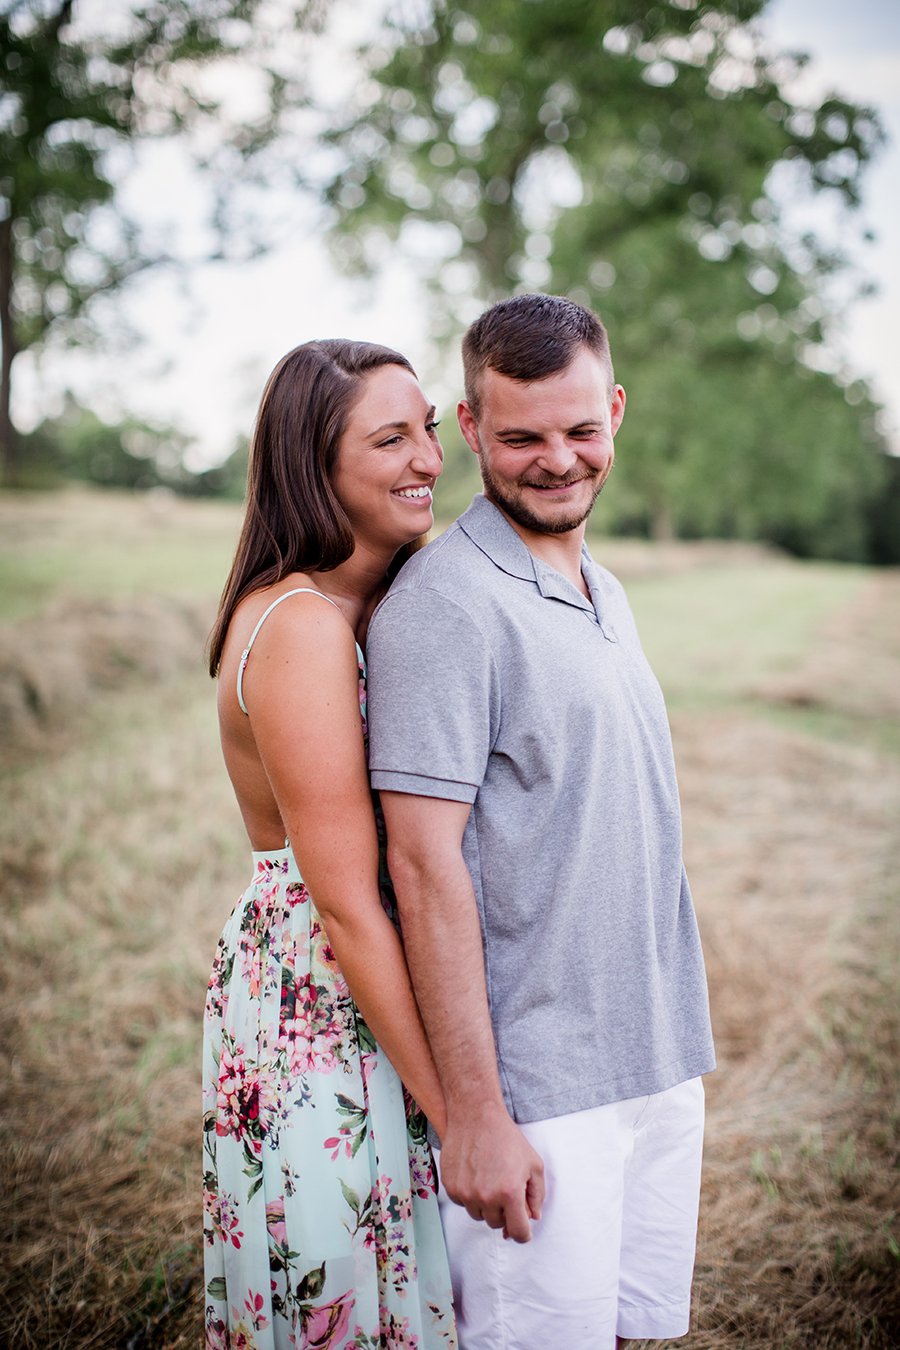 Holding hands from behind laughing at this Estate of Grace engagement session by Knoxville Wedding Photographer, Amanda May Photos.